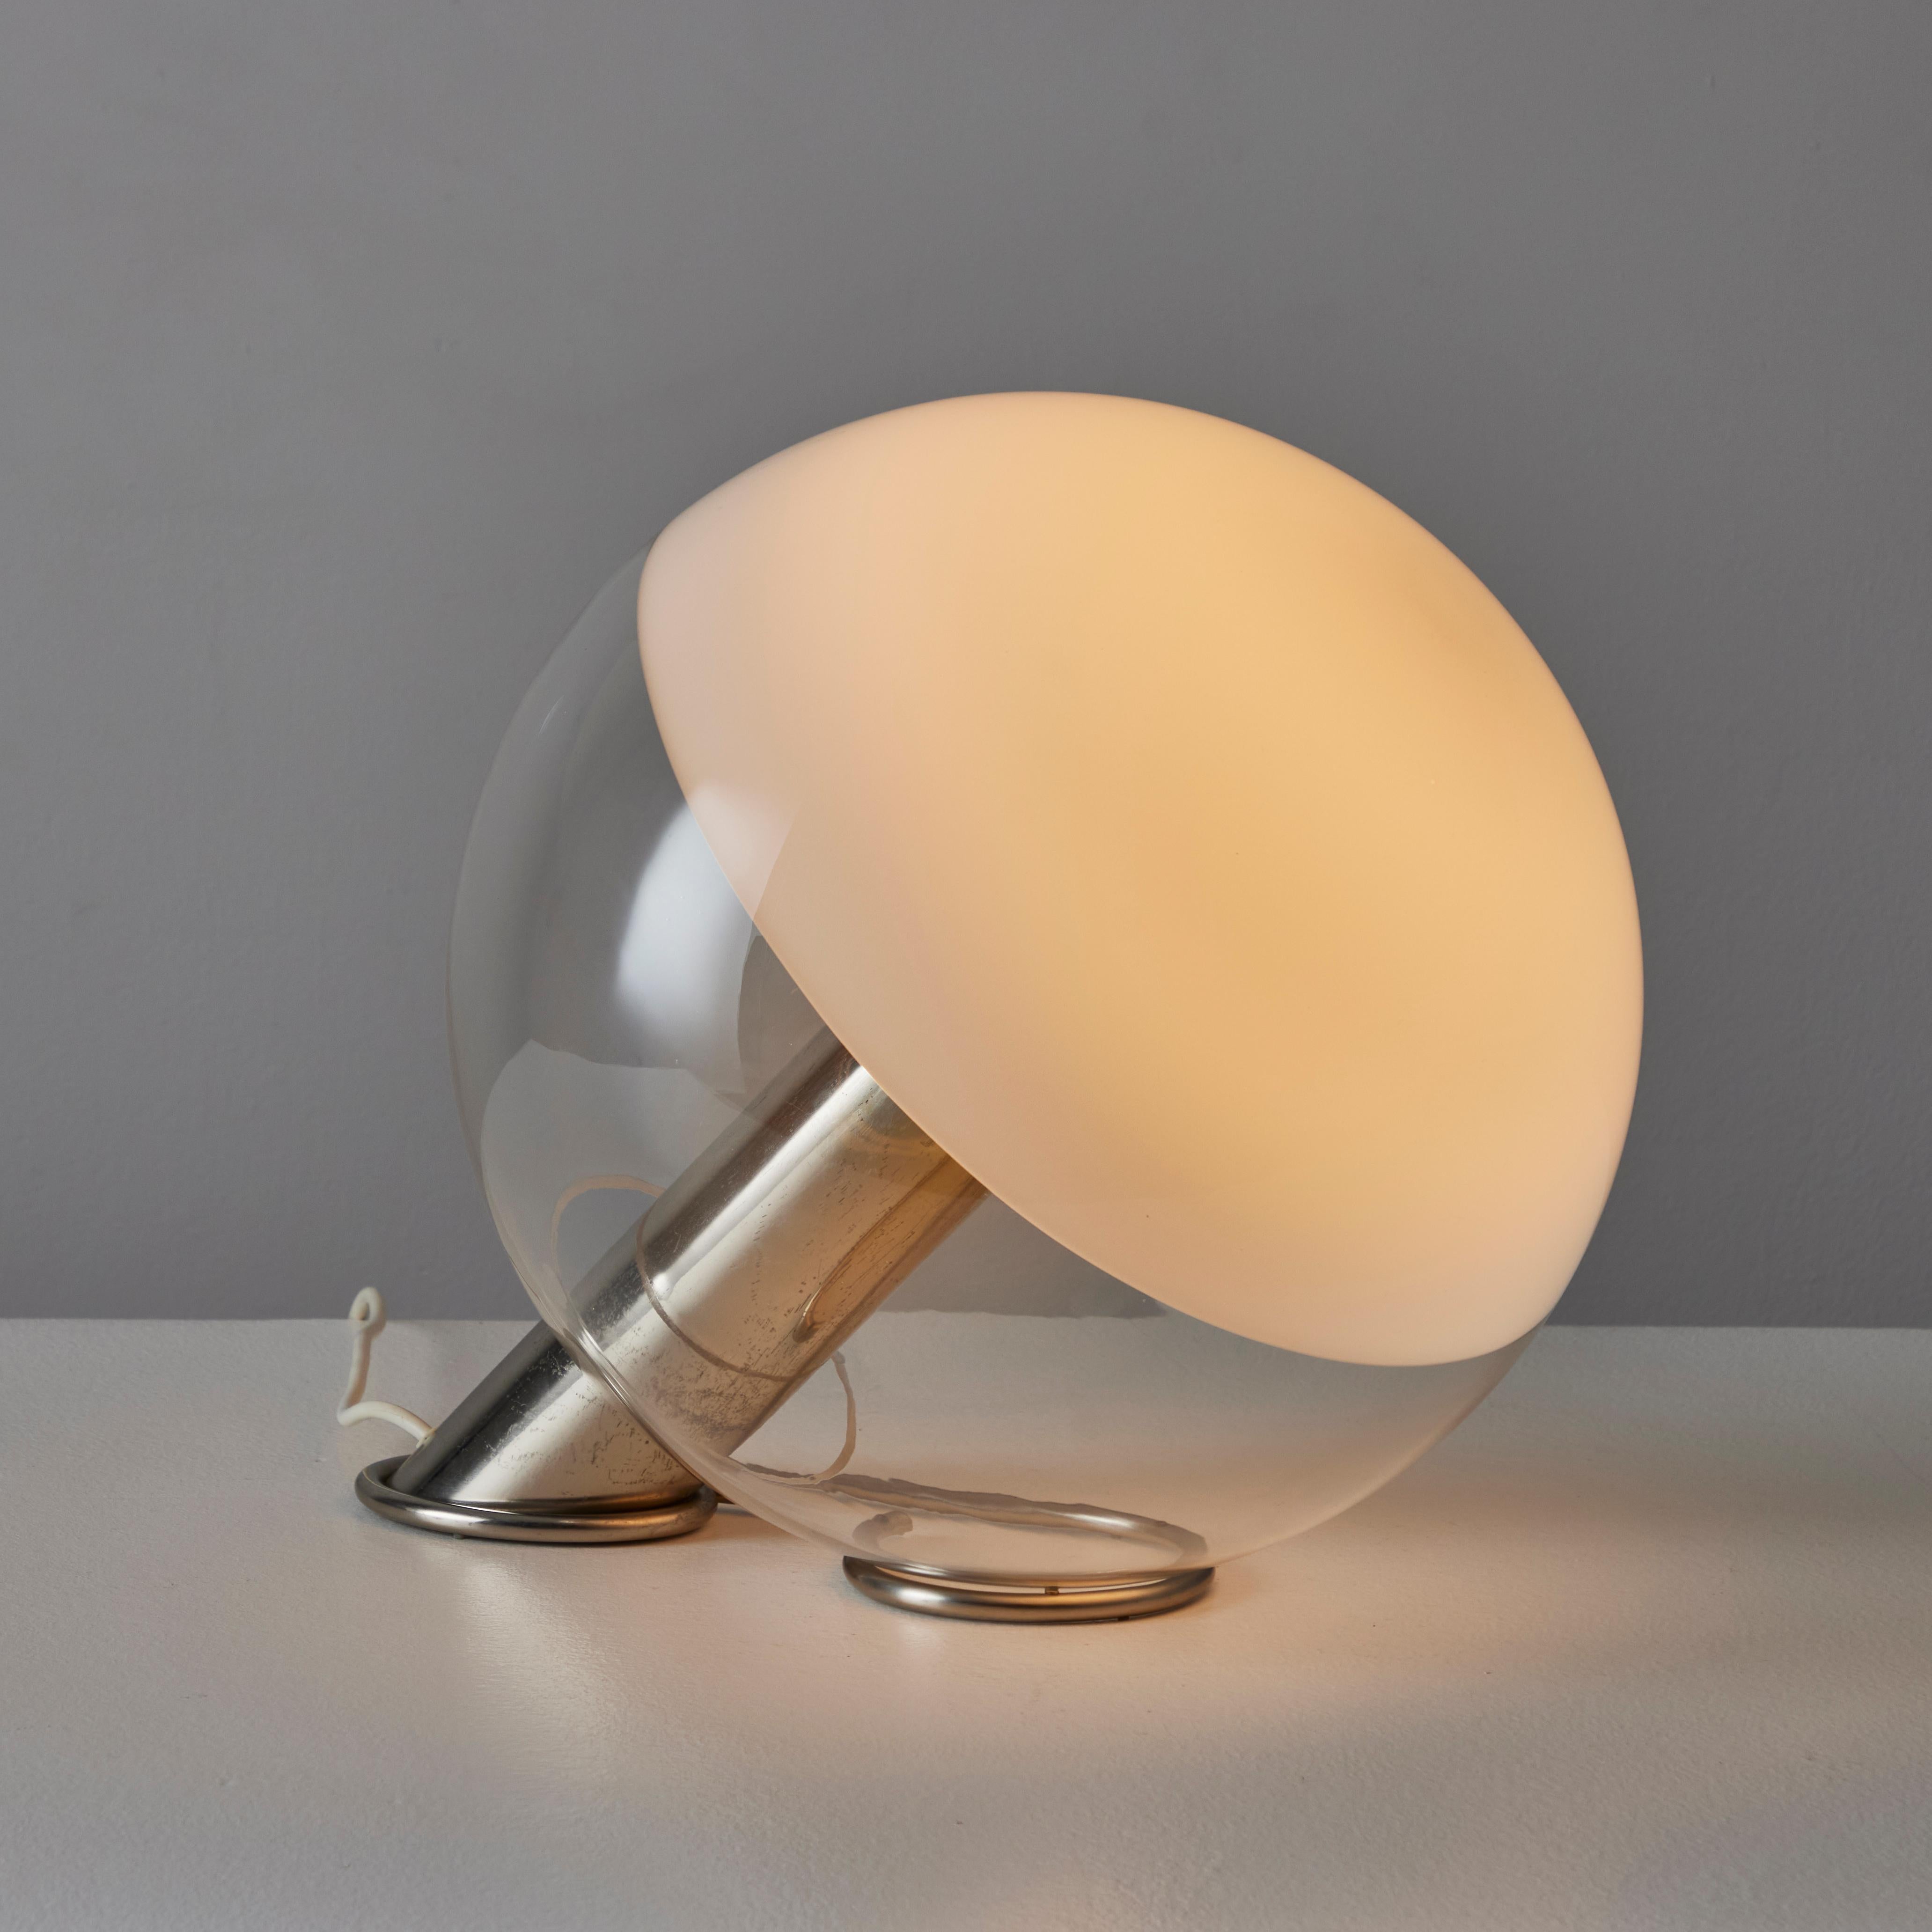 Rare Table Lamp by Guidetti Crippa for Lumi. Designed and manufactured in Italy, circa the 1970s. A gorgeous clear glass globe with a white-dipped top end, is cradled onto a polished nickel base. The base has a dimmer switch and orignal european